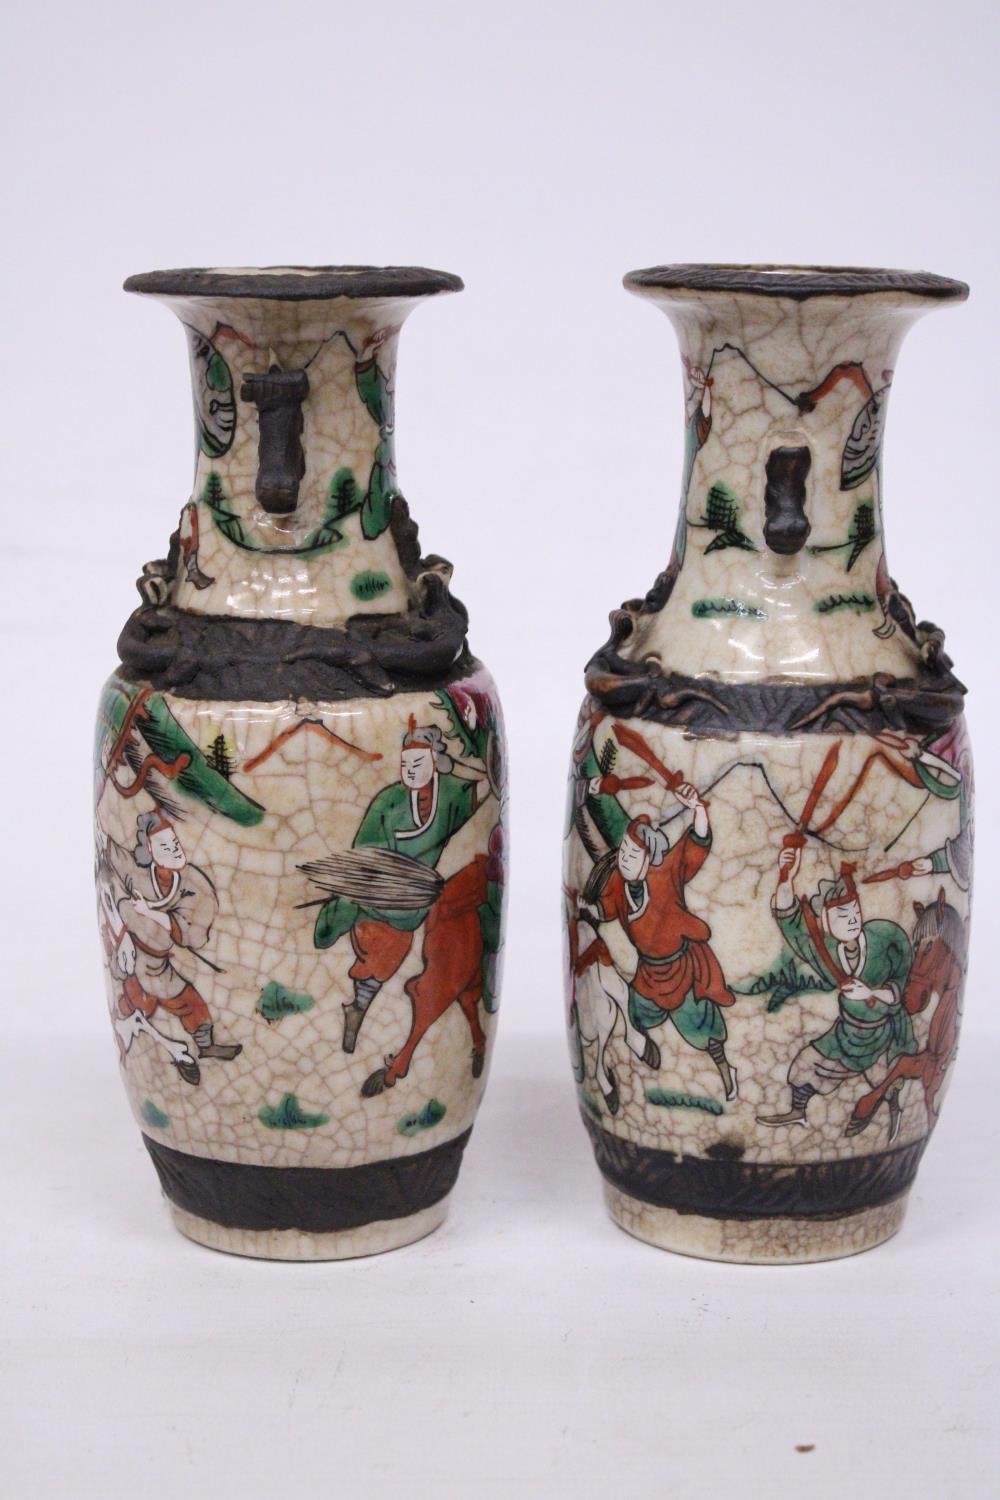 A PAIR OF CHINESE CRACKLE GLAZED VASES WITH WARRIOR SCENES - 18 CM (H) - MARK TO BASE - Image 4 of 6